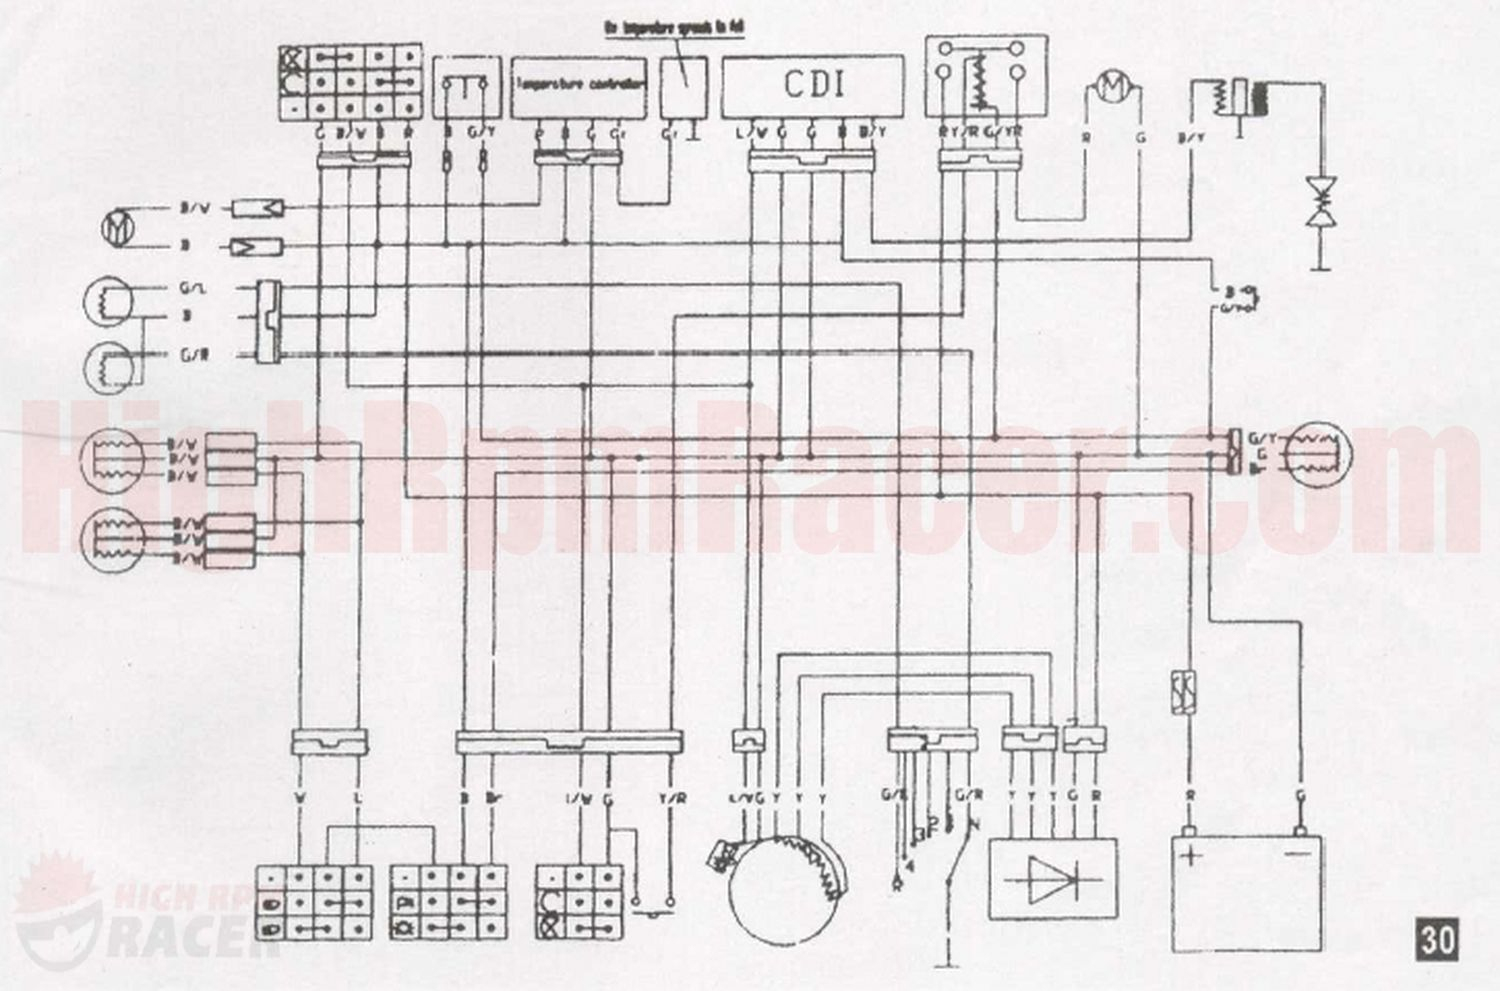 Wiring Diagram For Loncin 110 With 5 Pin Cdi | Wiring Diagram - 5 Pin Cdi Wiring Diagram